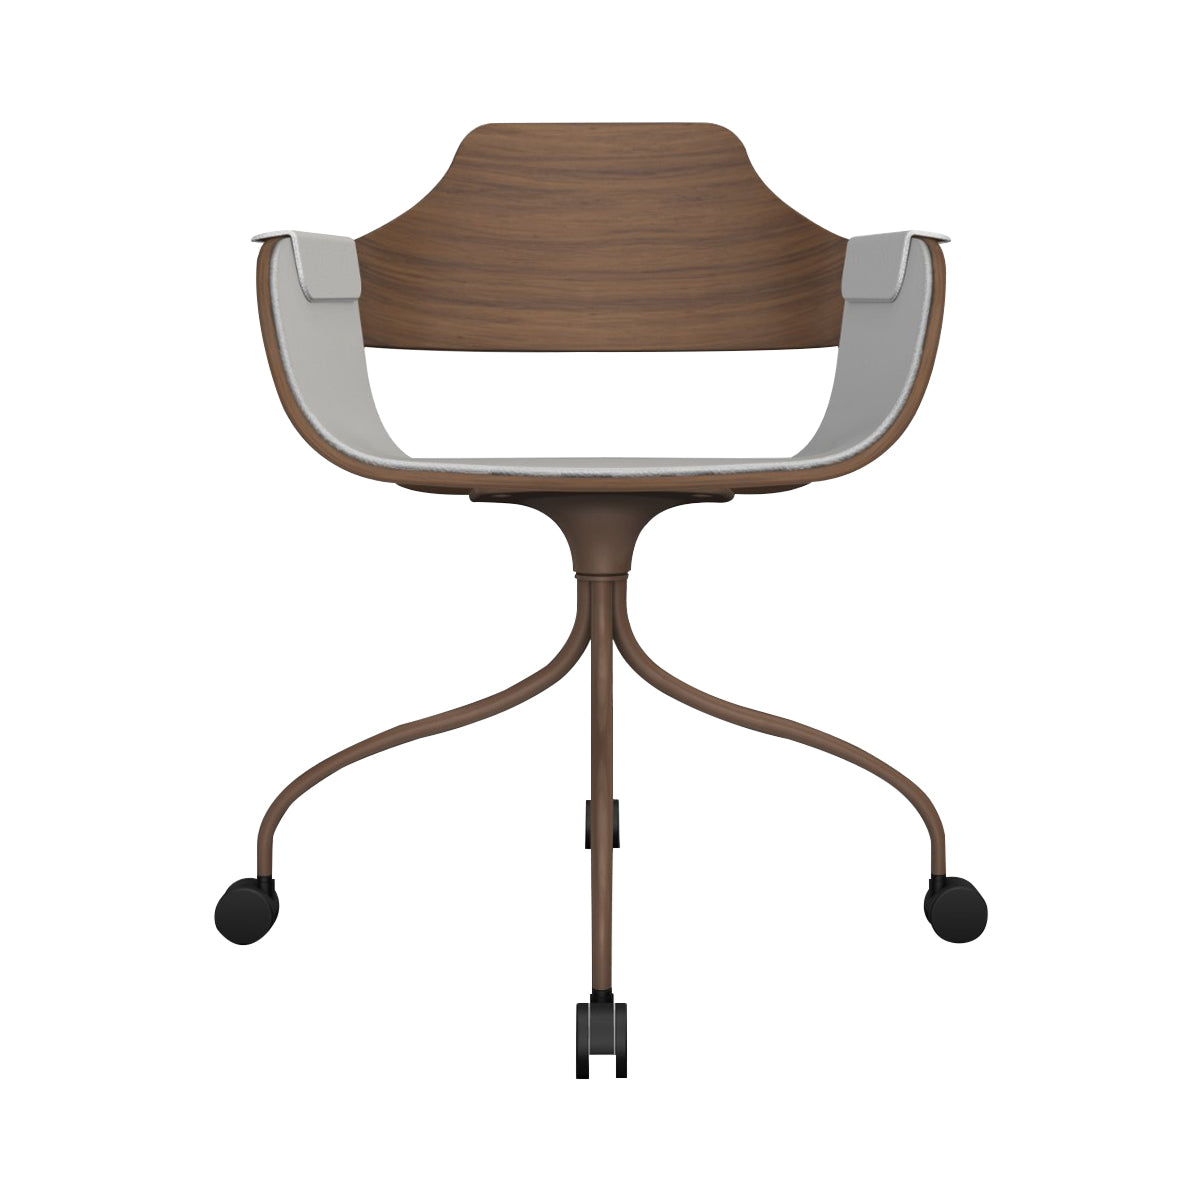 Showtime Chair with Wheel: Interior Seat + Armrest Upholstered + Pale Brown